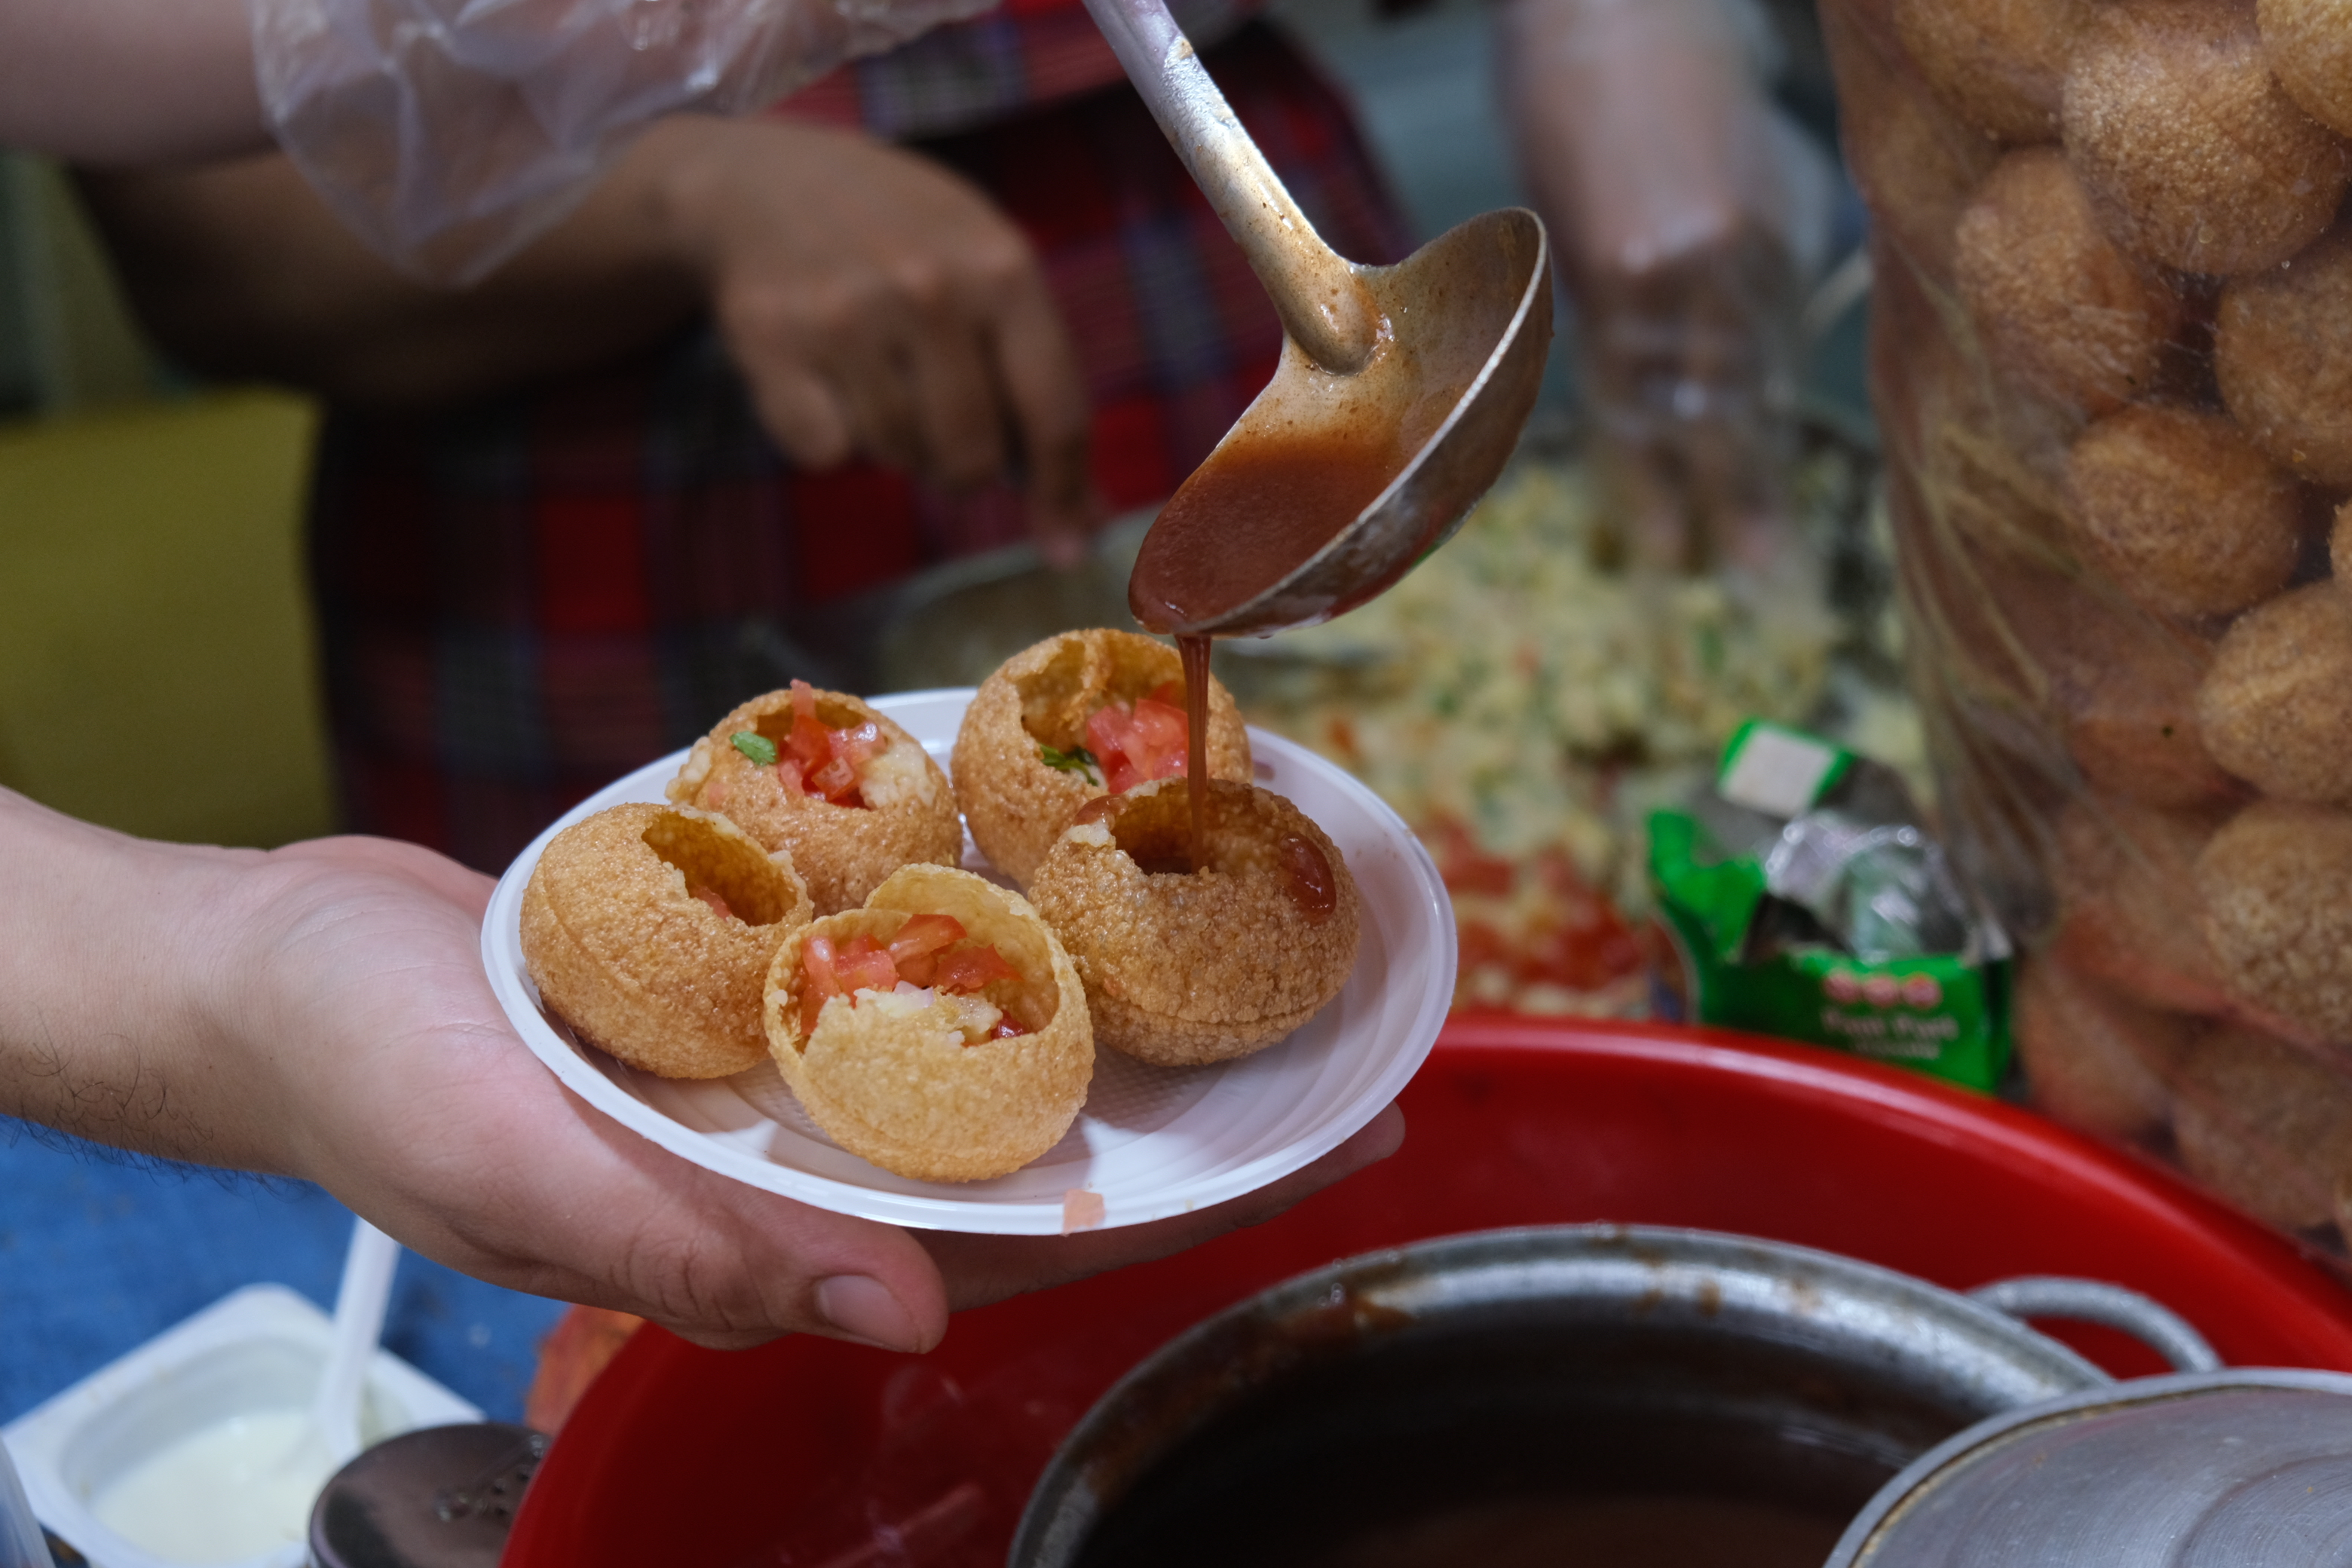 Tamanrid sauce is poured over panipuri for serving diners to Ho Thi Ky Food Street in Ho Chi Minh City. Photo: Ngoc Phuong / Tuoi Tre News